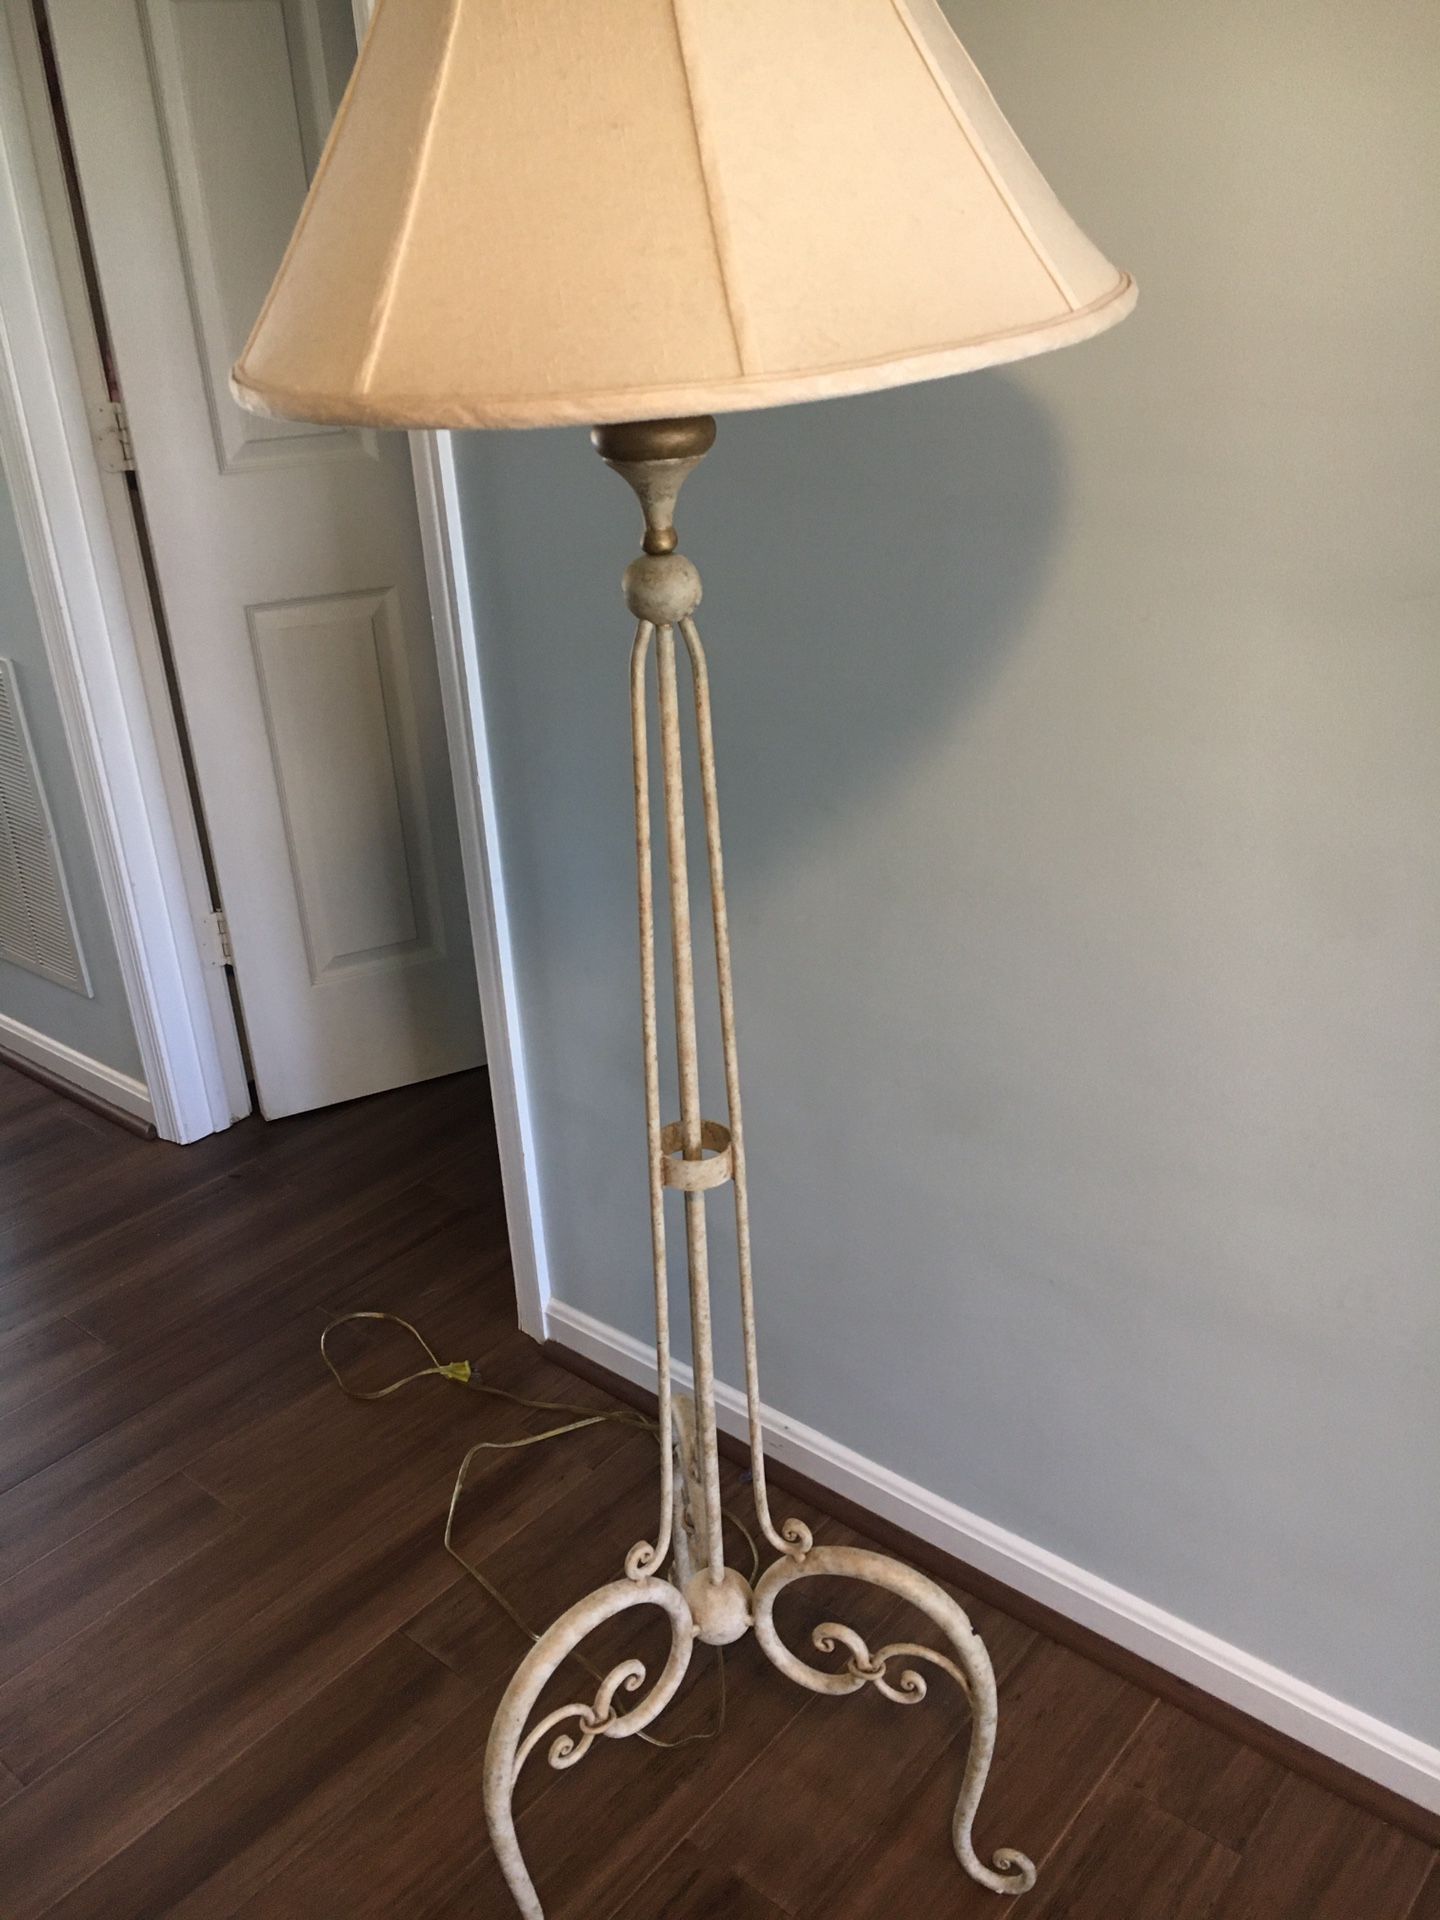 French Country Style Lamp (Ethan Allen)